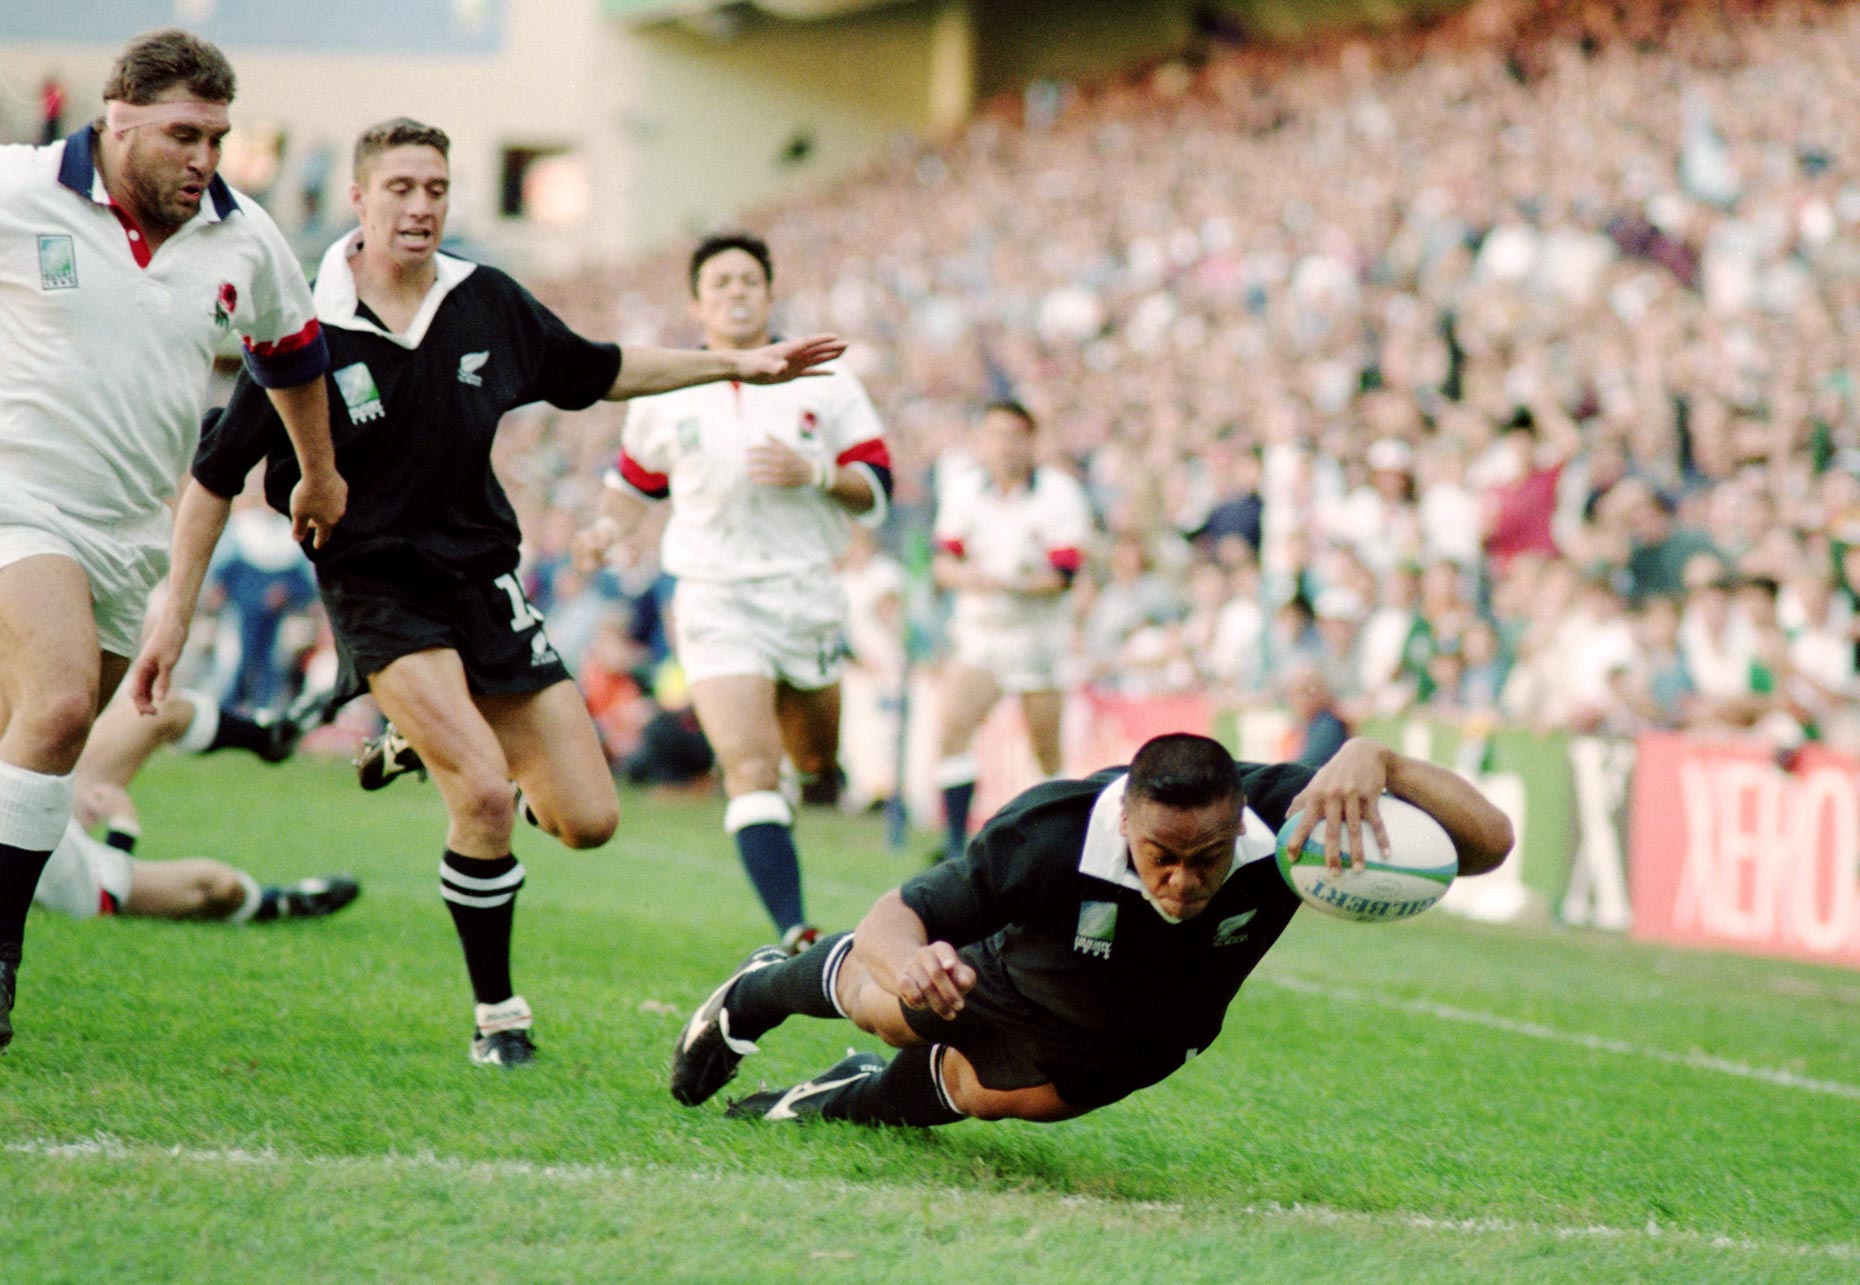 Jonah Lomu: The 'Shakespearean' rugby hero who changed the game forever